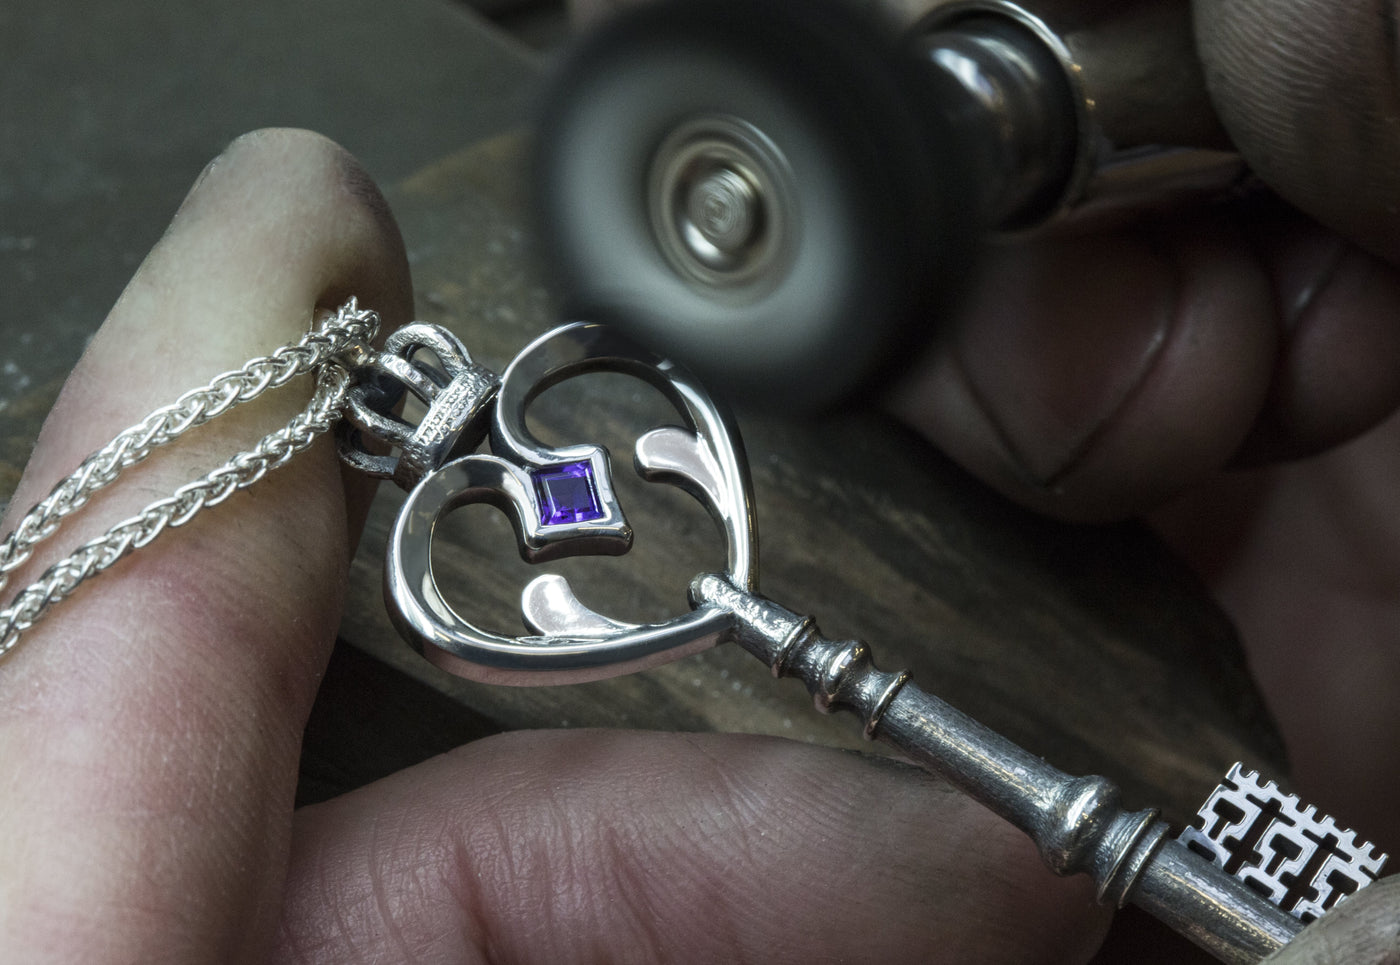 Learn more about the tradition of giving a key necklace - Bashert Jewelry